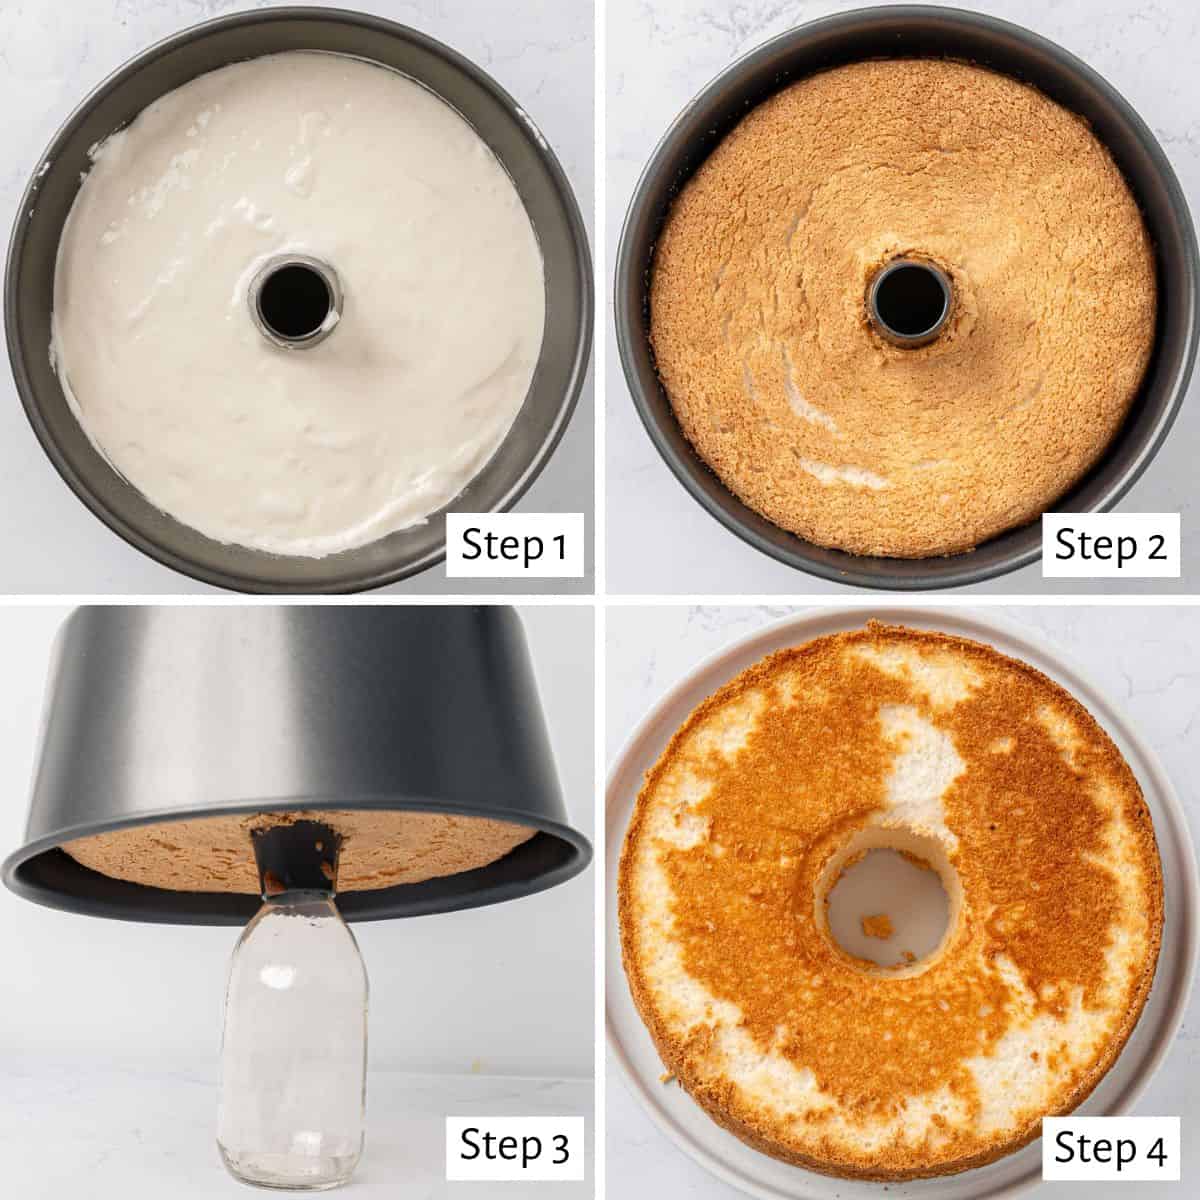 4 image collage making recipe in a tube pan: 1- batter spread evenly before baking, 2- after baking to show a golden brown top, 3- pan flipped over to cool, 4- cake after removed from pan.